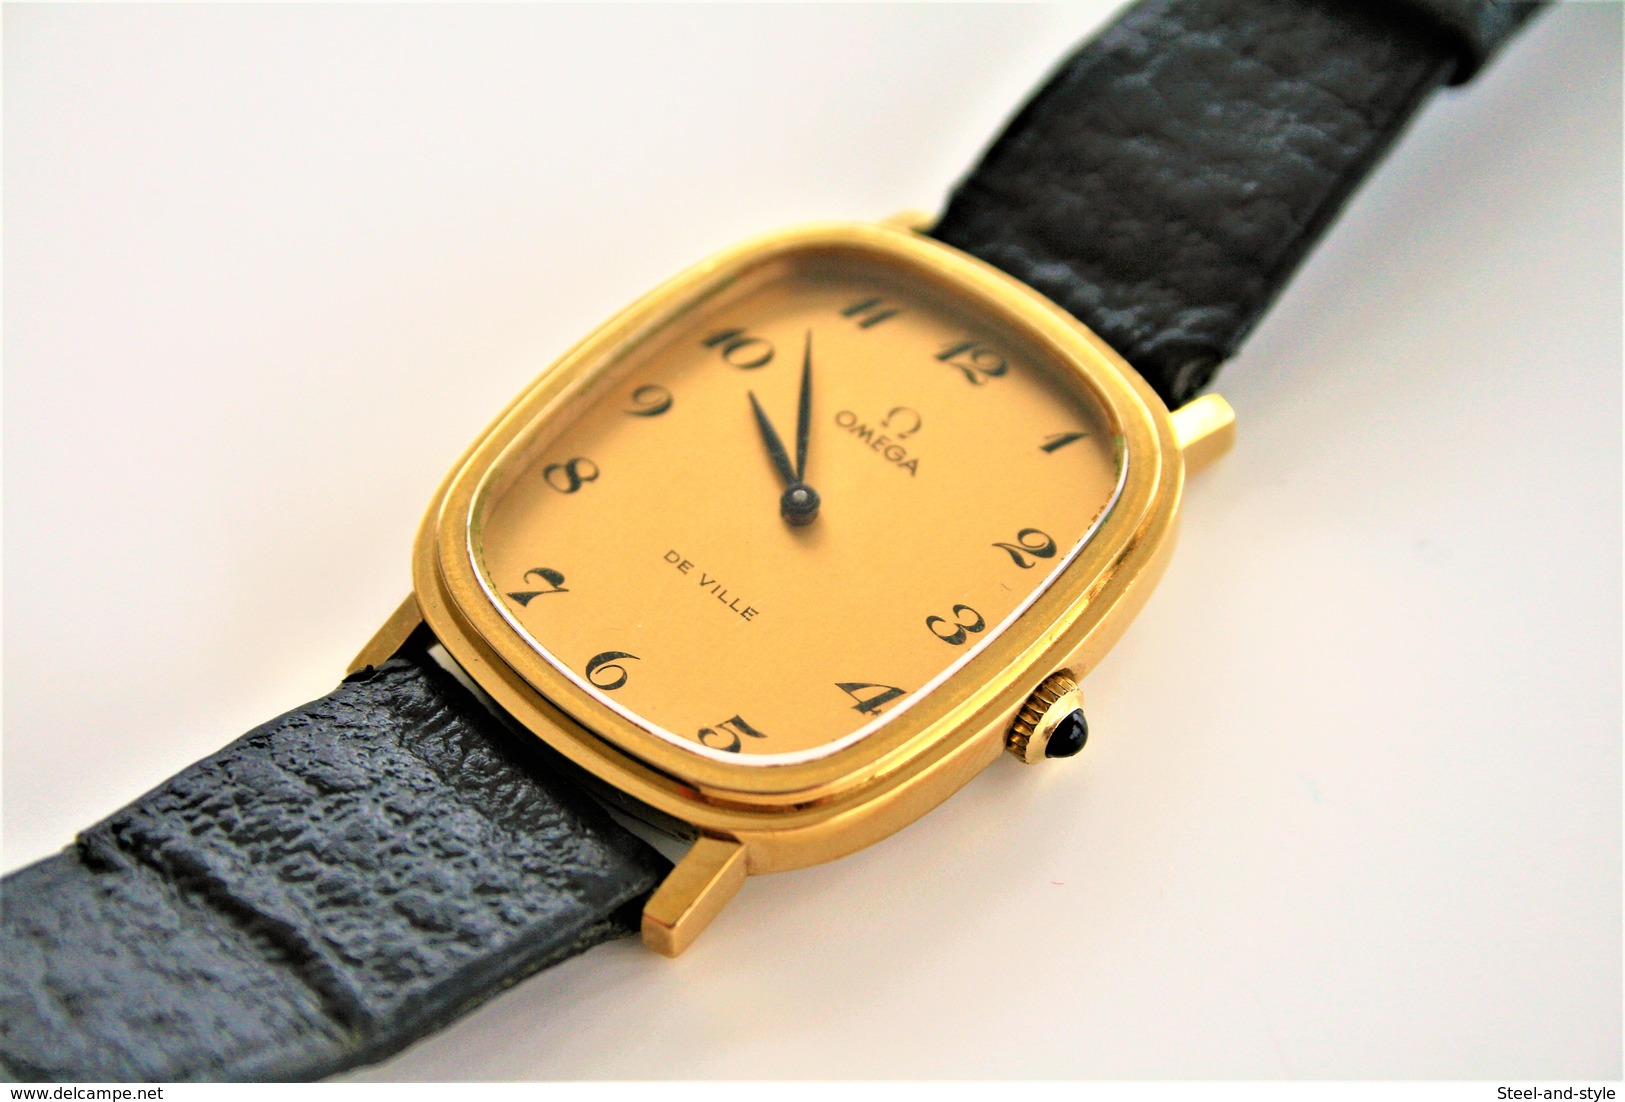 watches : OMEGA DEVILLE MECHANICAL MEN  - WITH ORIGINAL BAND BOX AND BOX PROTECTION 1973 - original - running - excelent